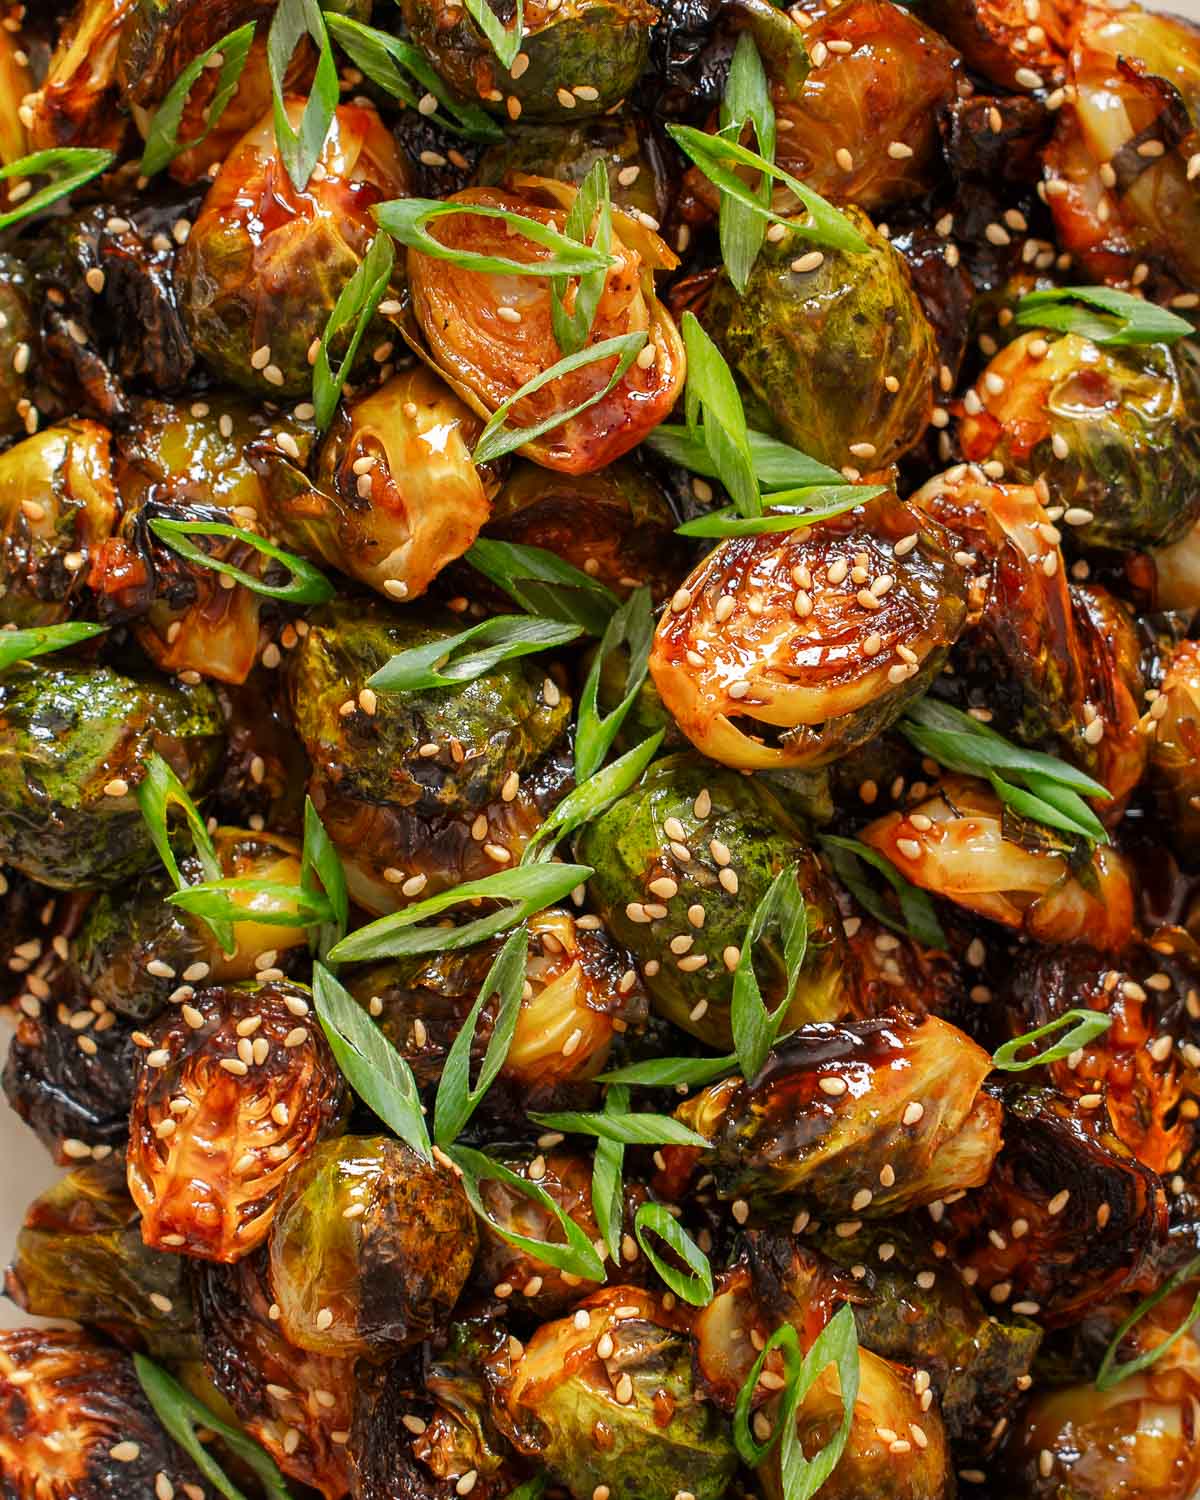 A detail shot of gochujang brussel sprouts.